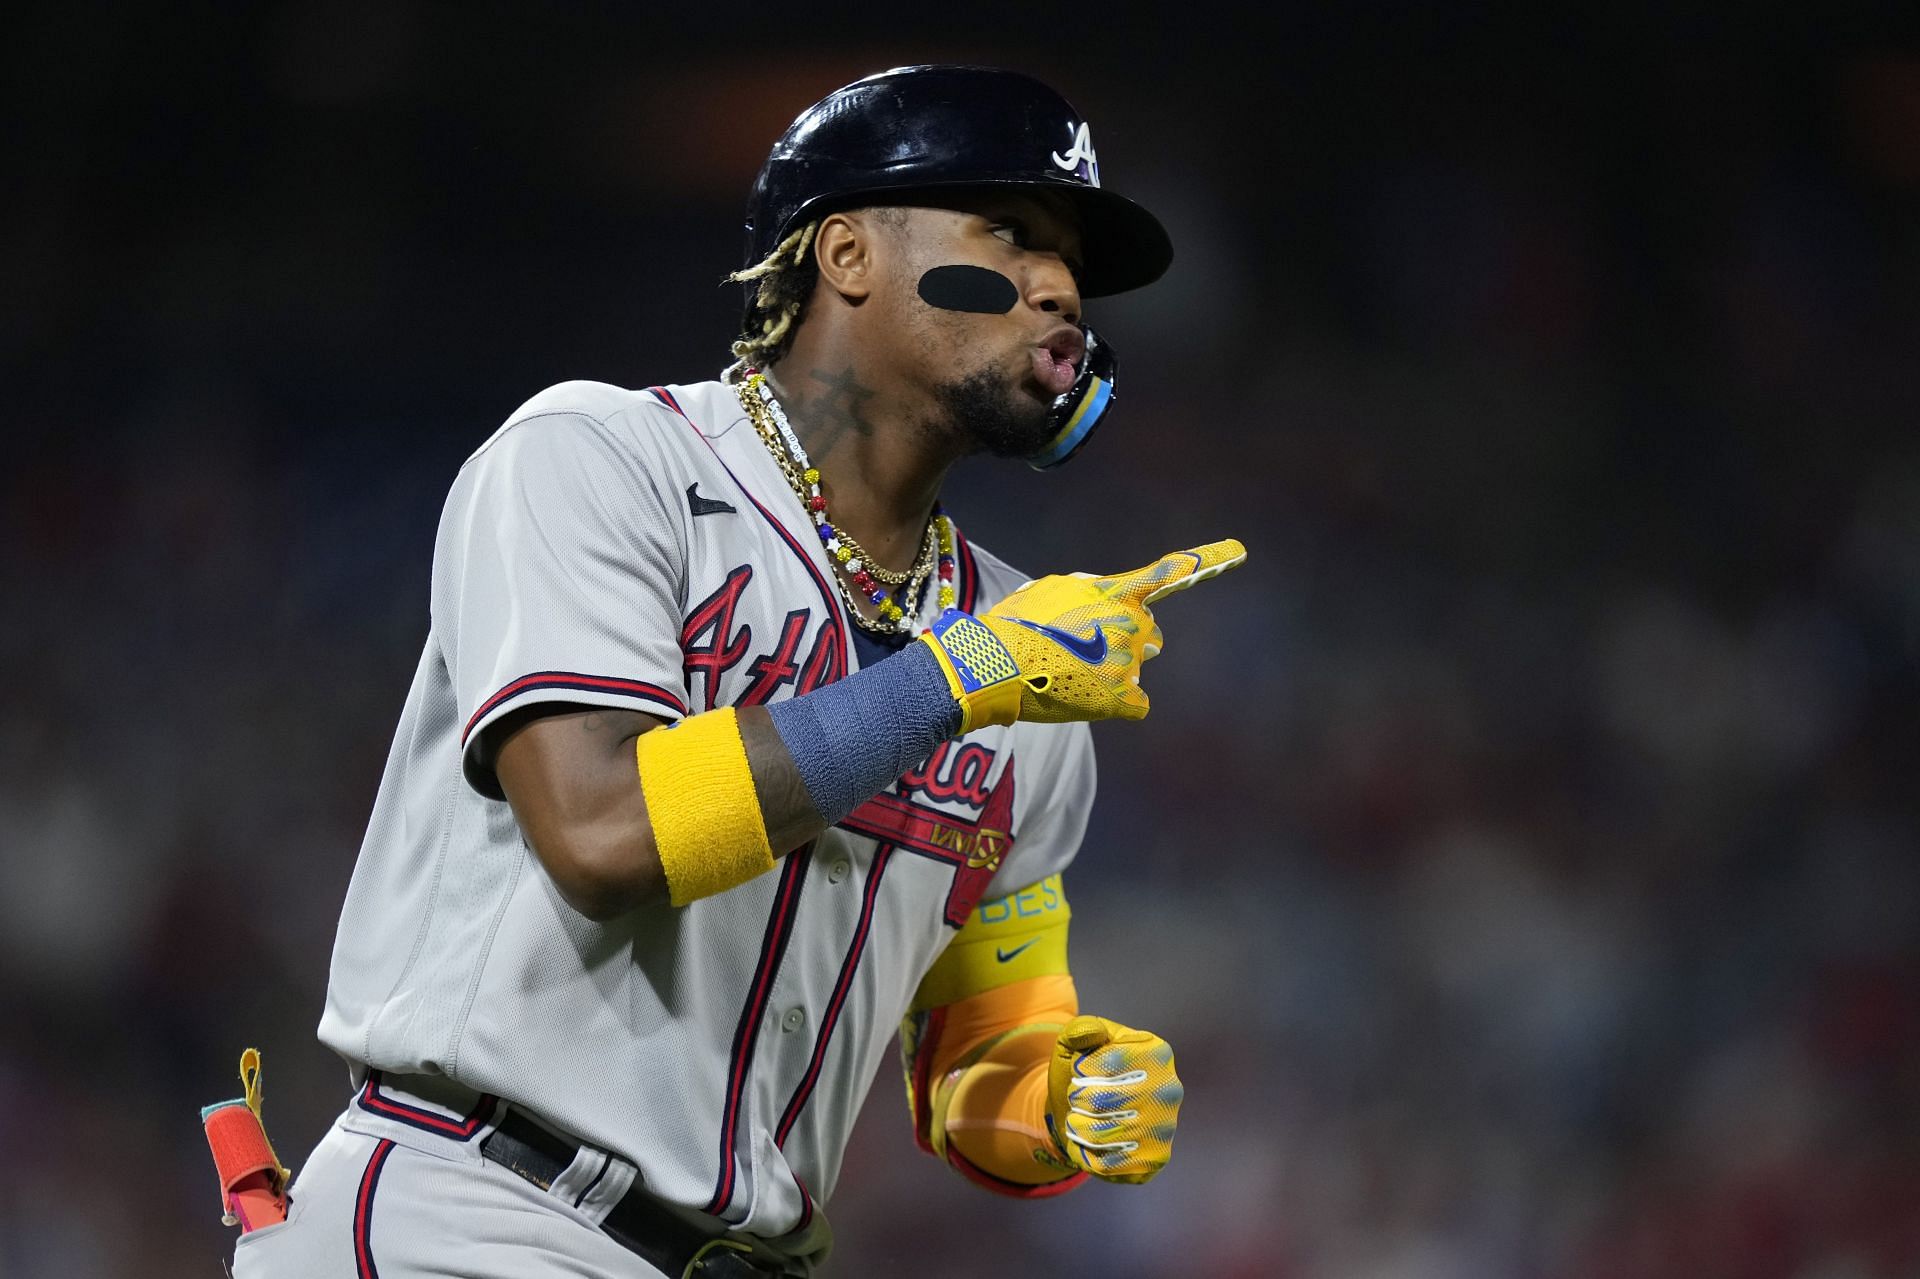 Watch: Ronald Acuna Jr. teases Phillies fans after Braves win NL East